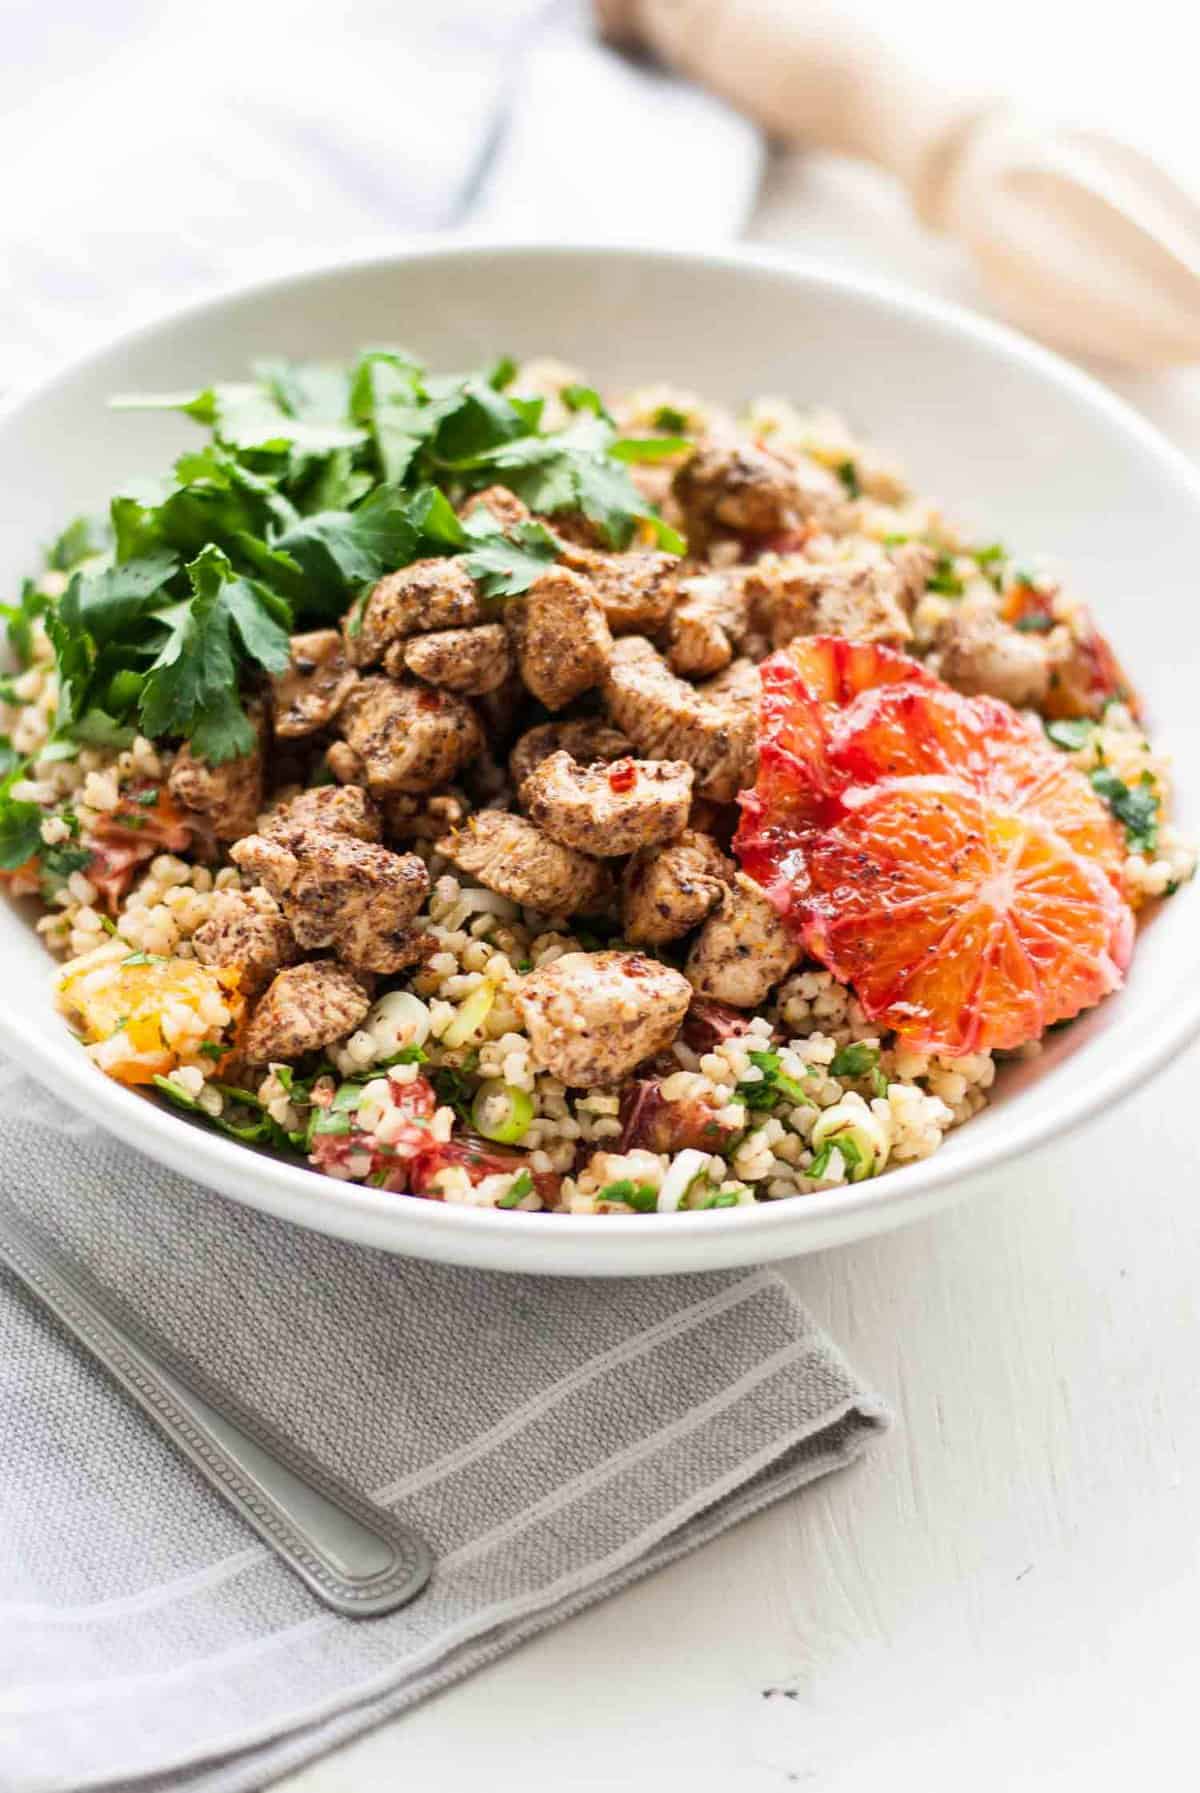 A chicken tabbouleh salad bowl with herbs and orange slices on top.